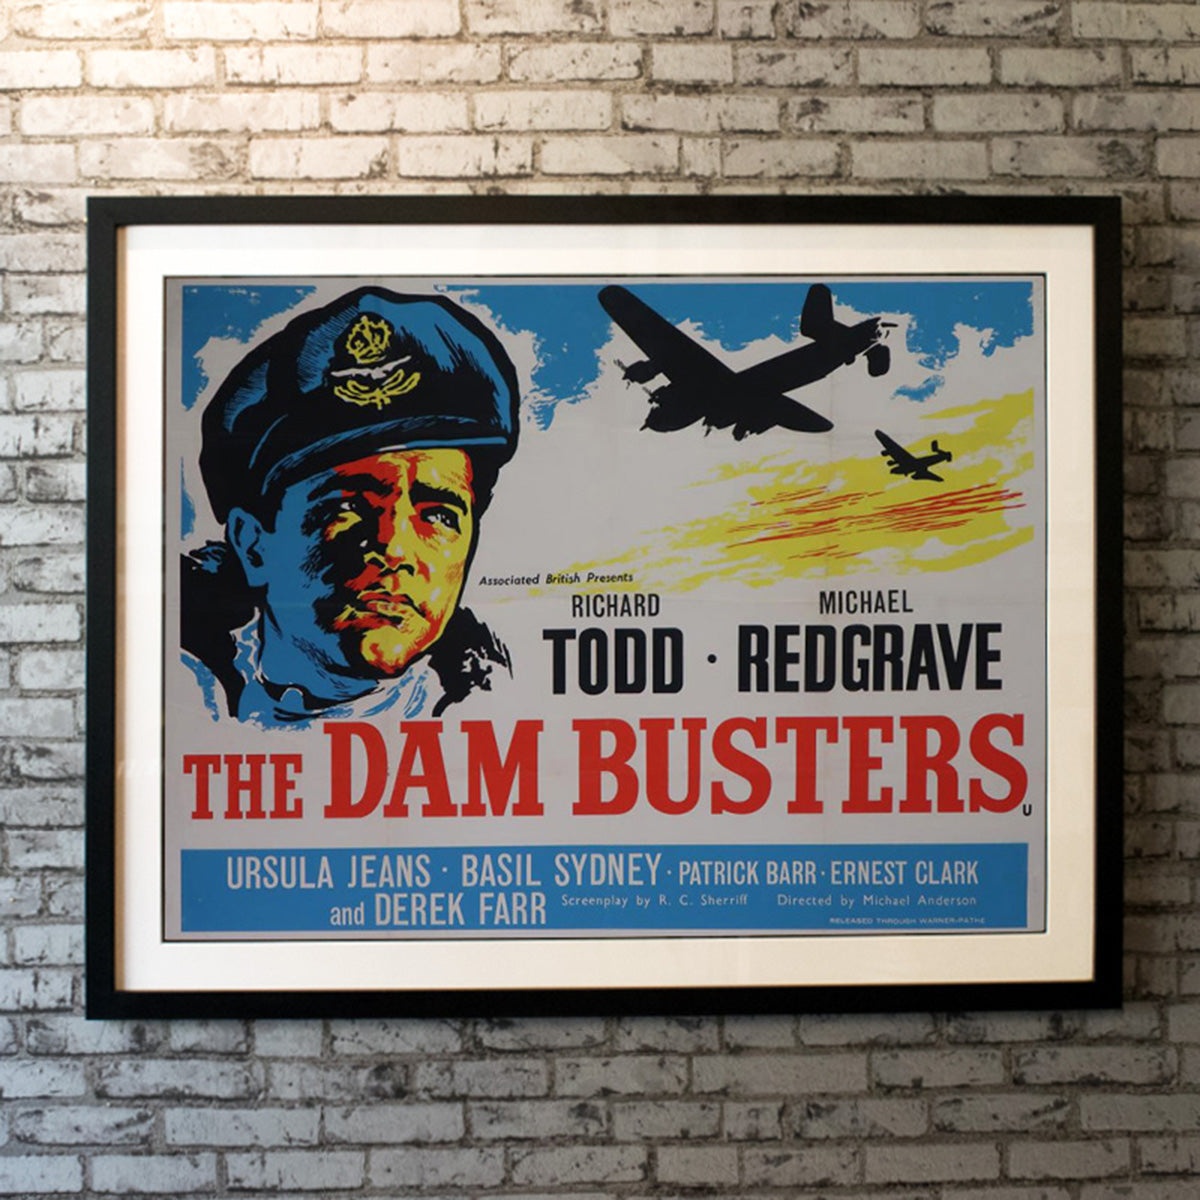 Original Movie Poster of Dam Busters, The (1960R)